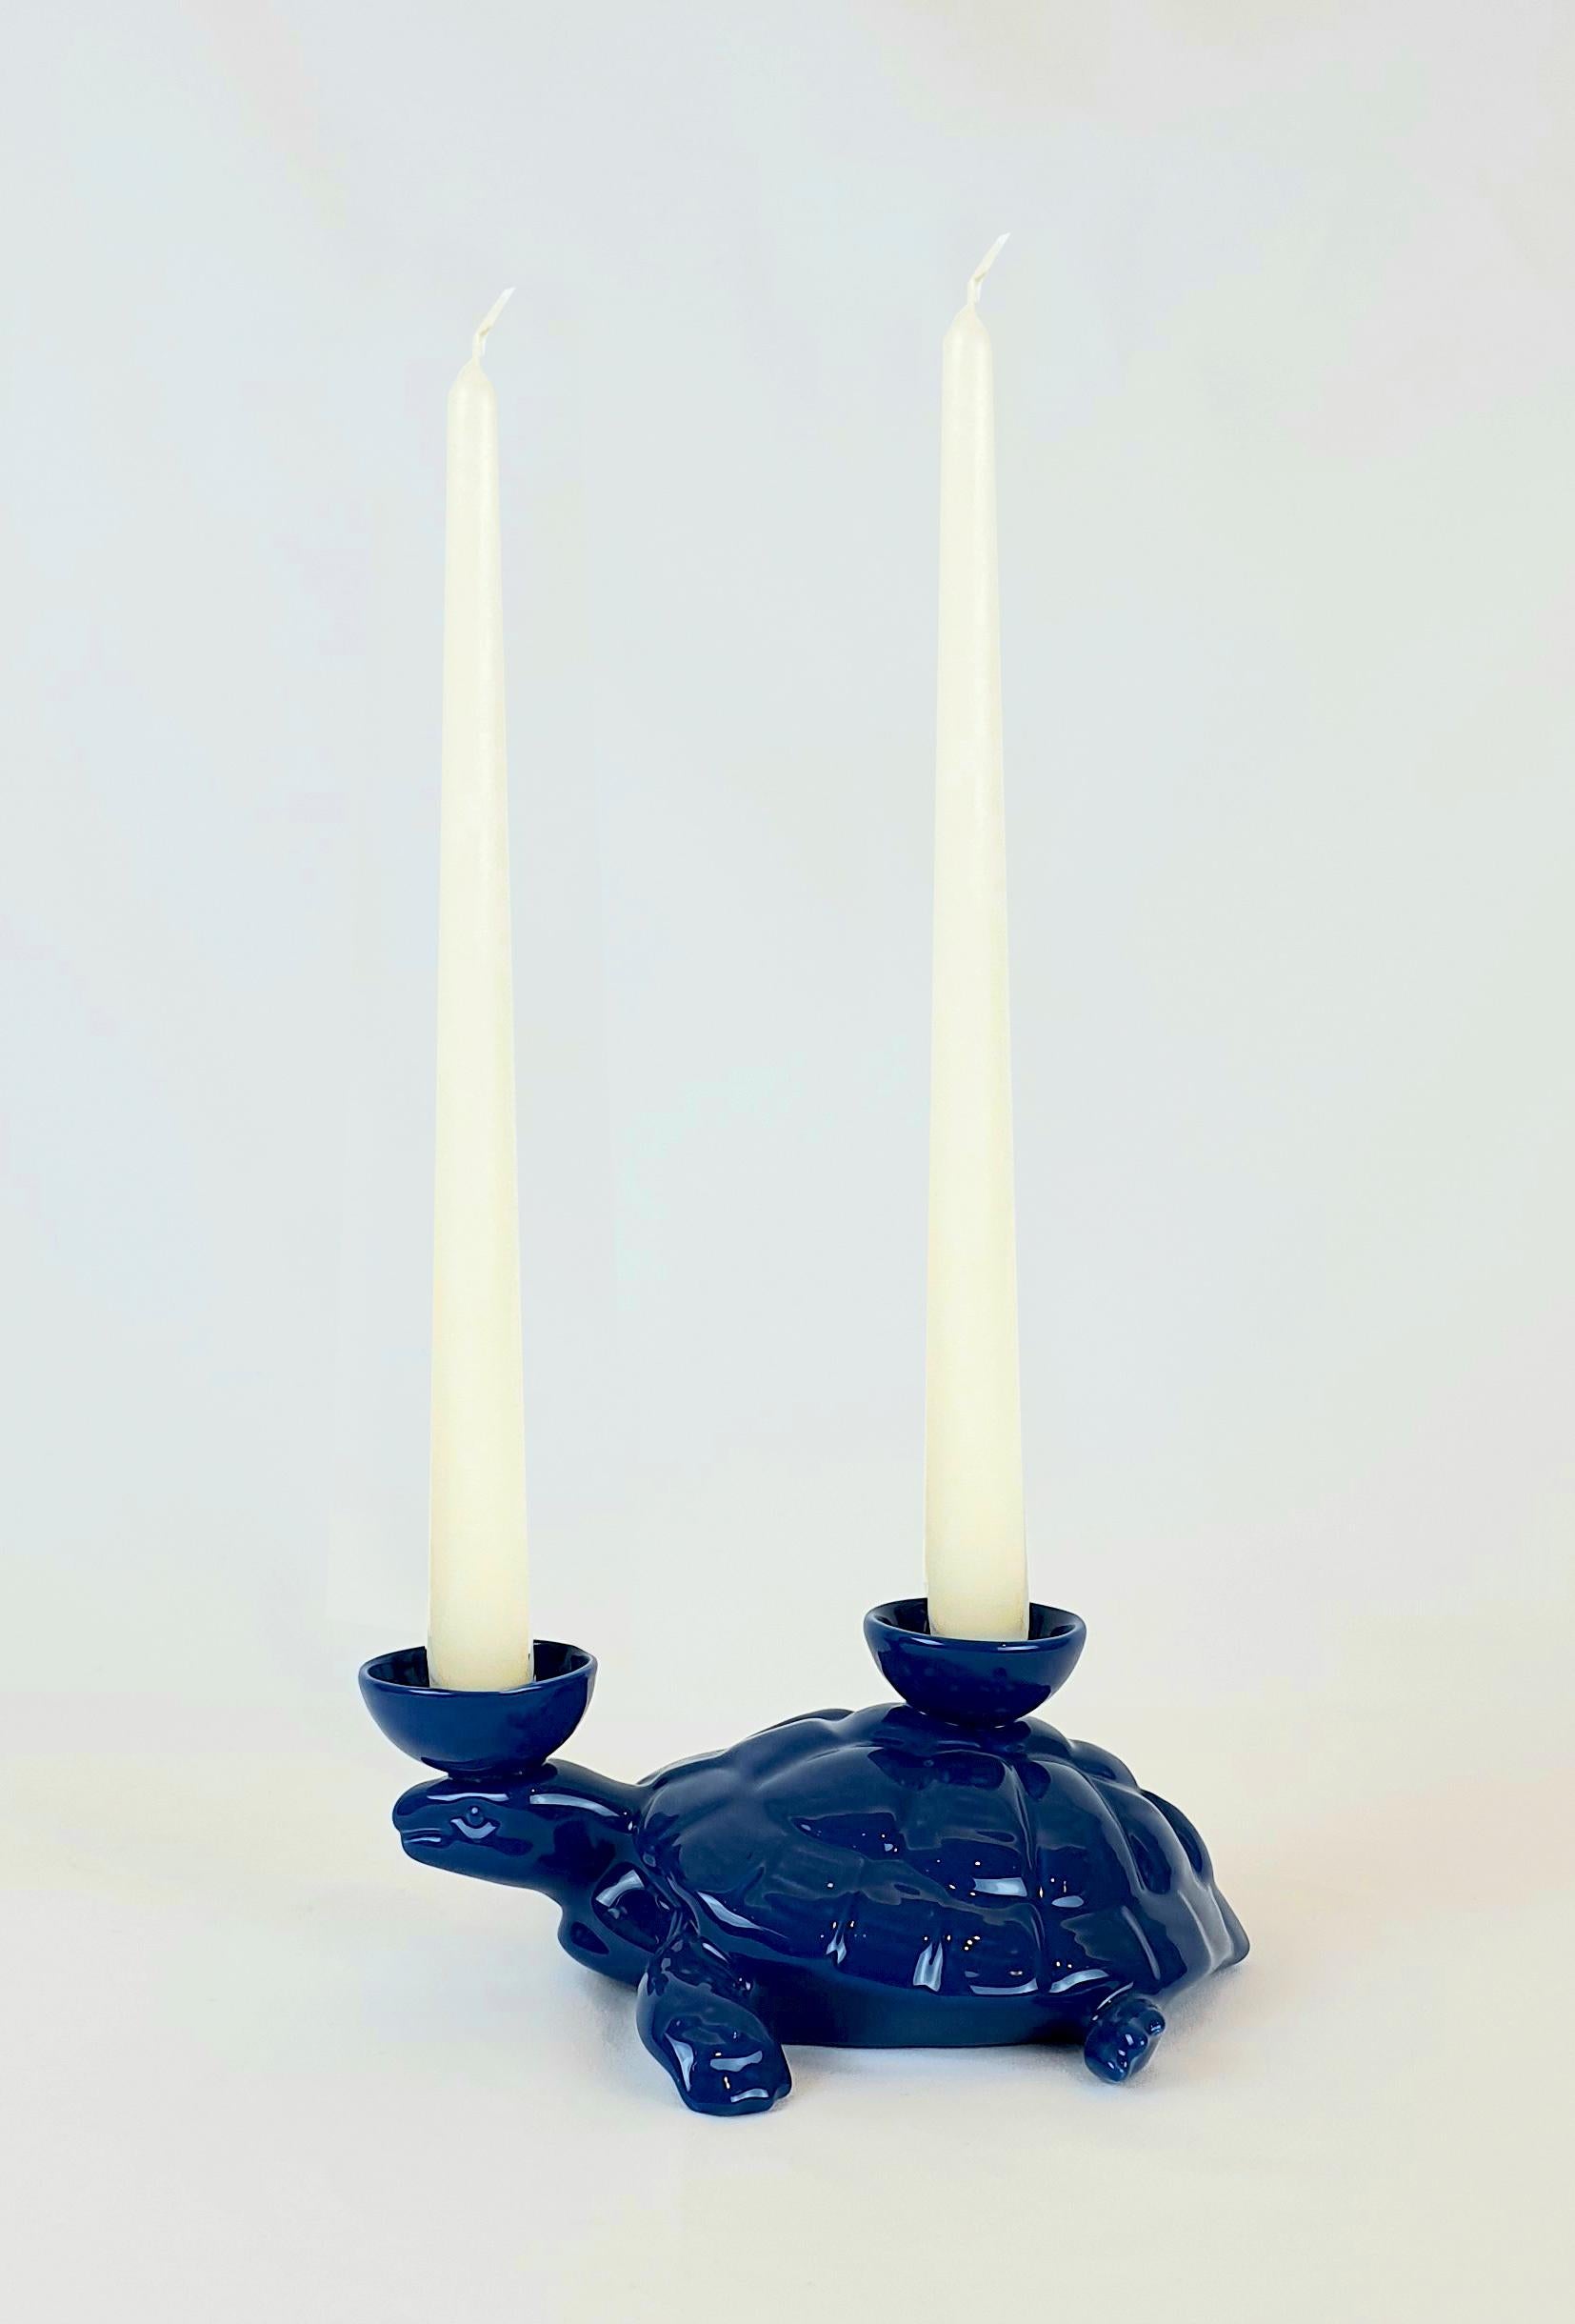 This turtle is part of an original collection of candle holder animals. The realization of the shape takes place through a mold with liquid clay; tiled and hand painted in a vast range of colours, from the most delicate pastels to the more saturated